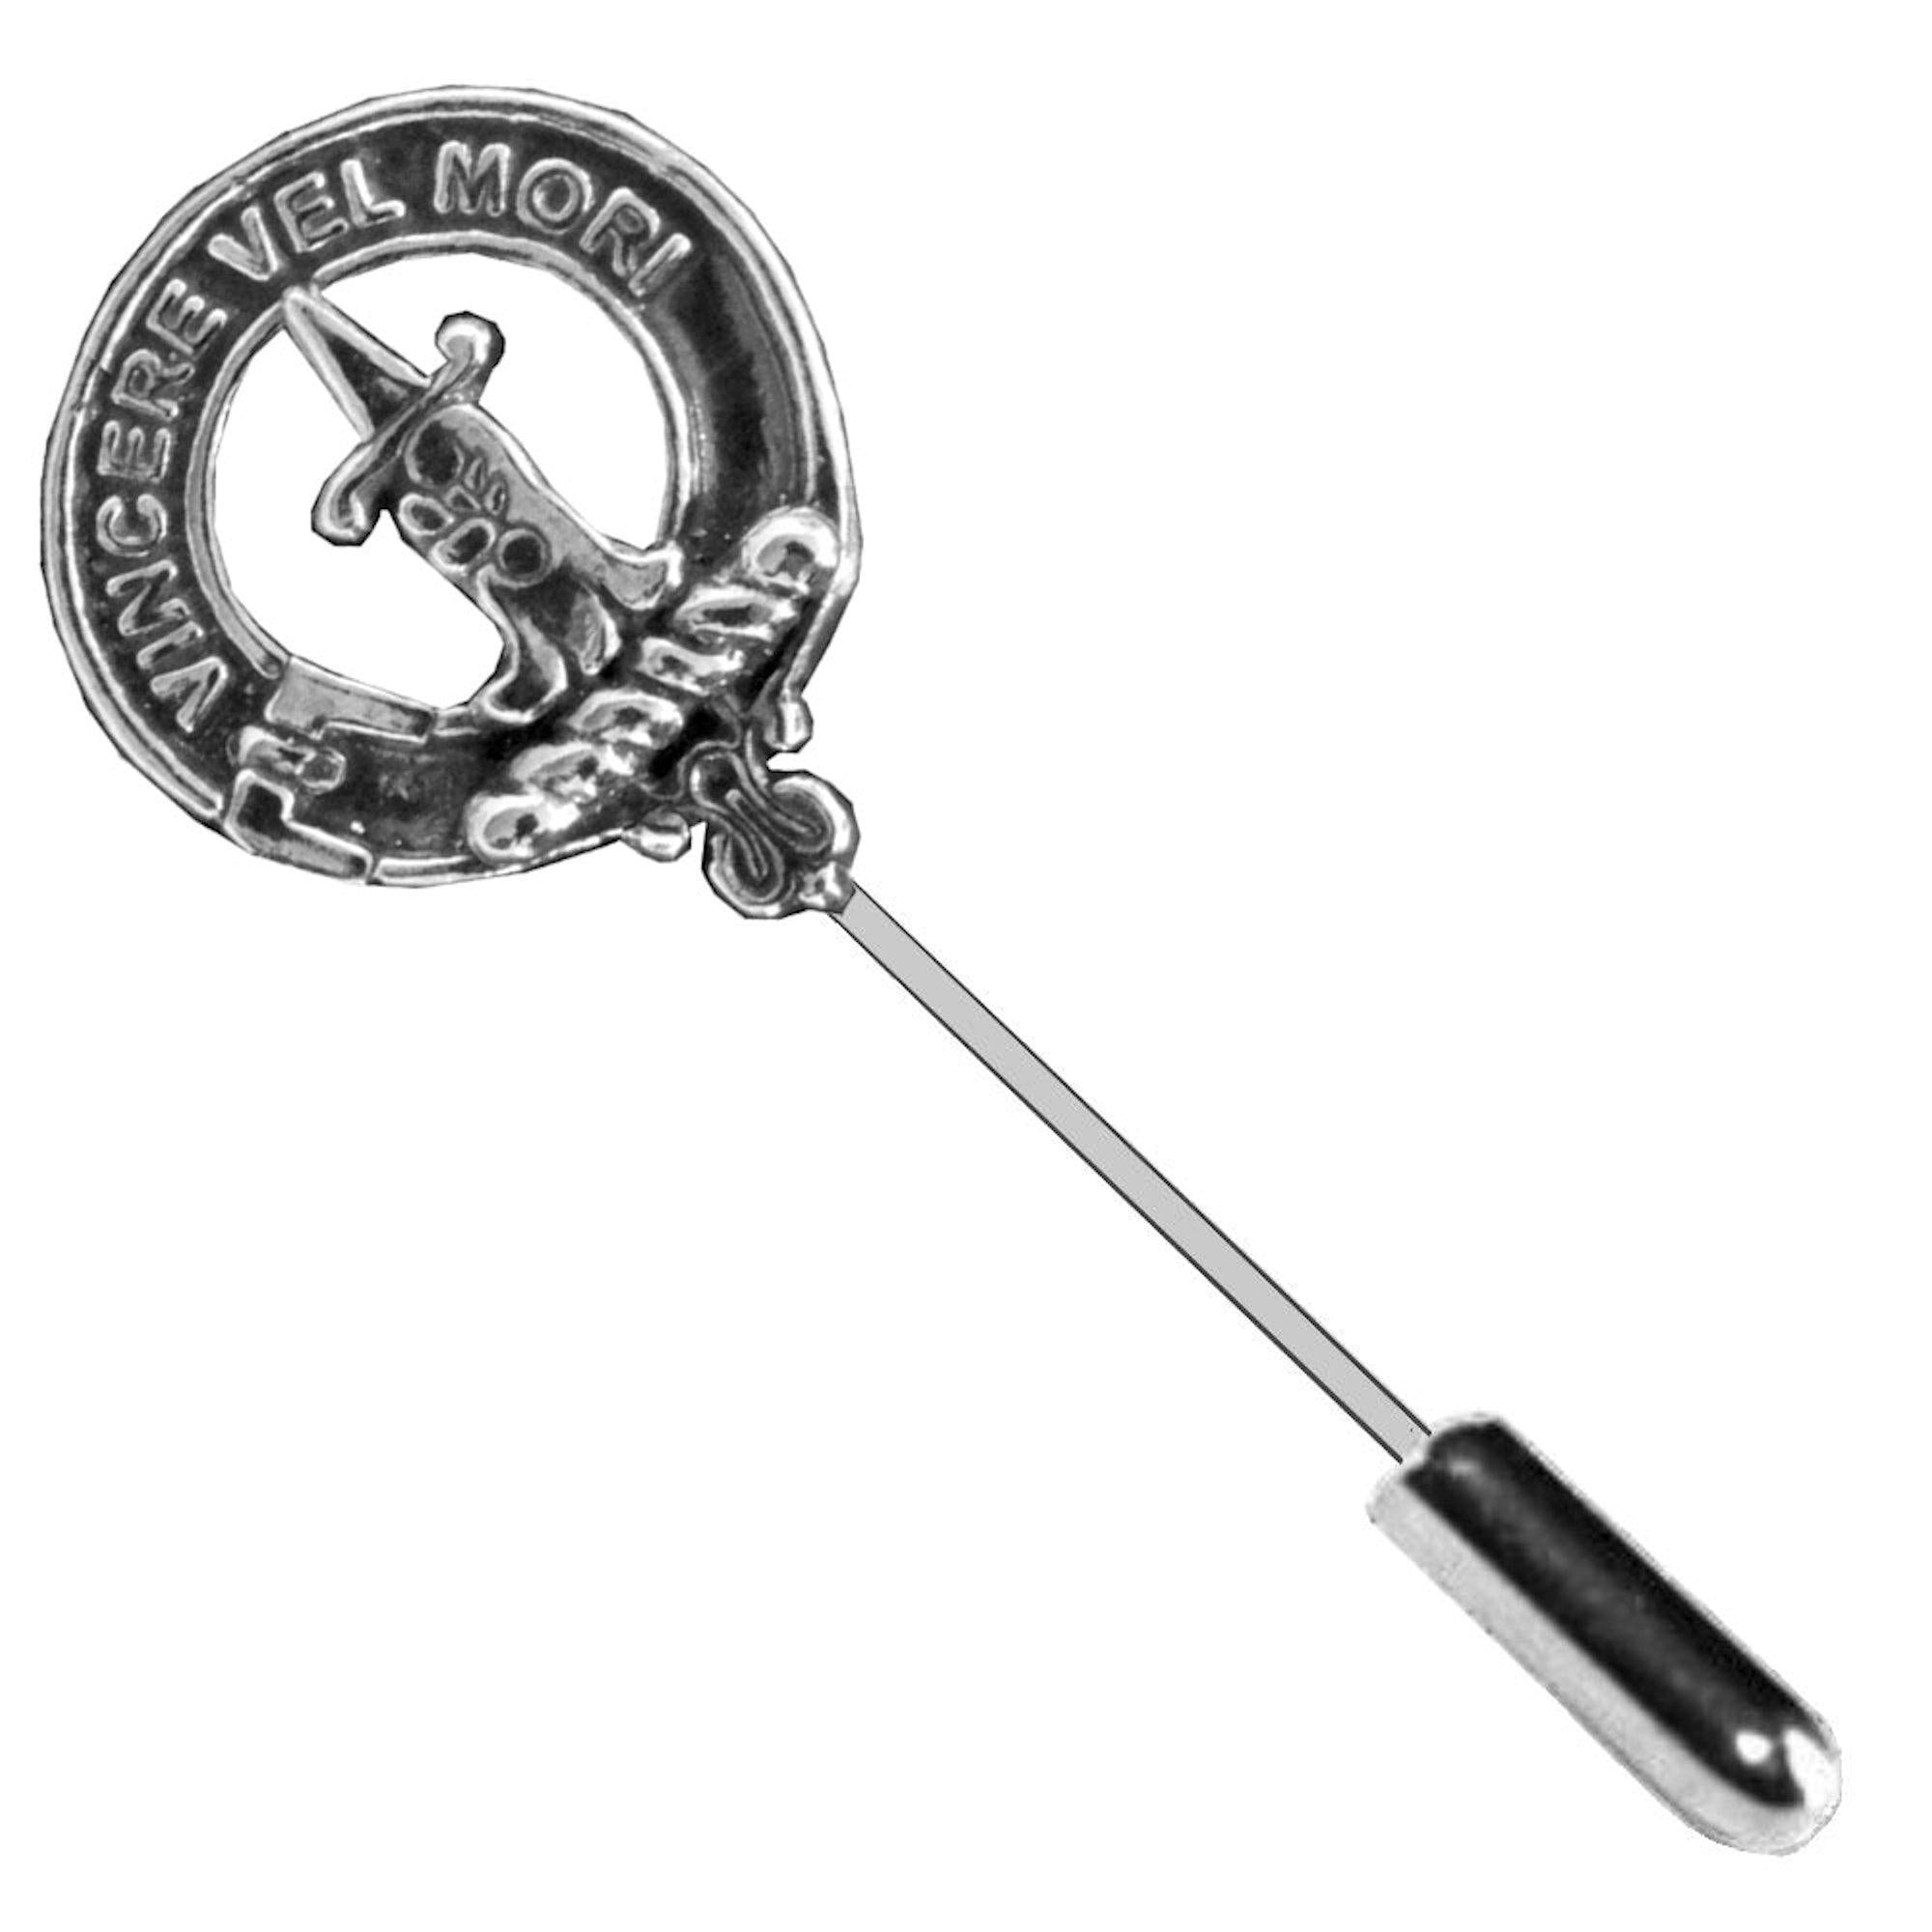 MacDowell Clan Crest Stick or Cravat pin, Sterling Silver